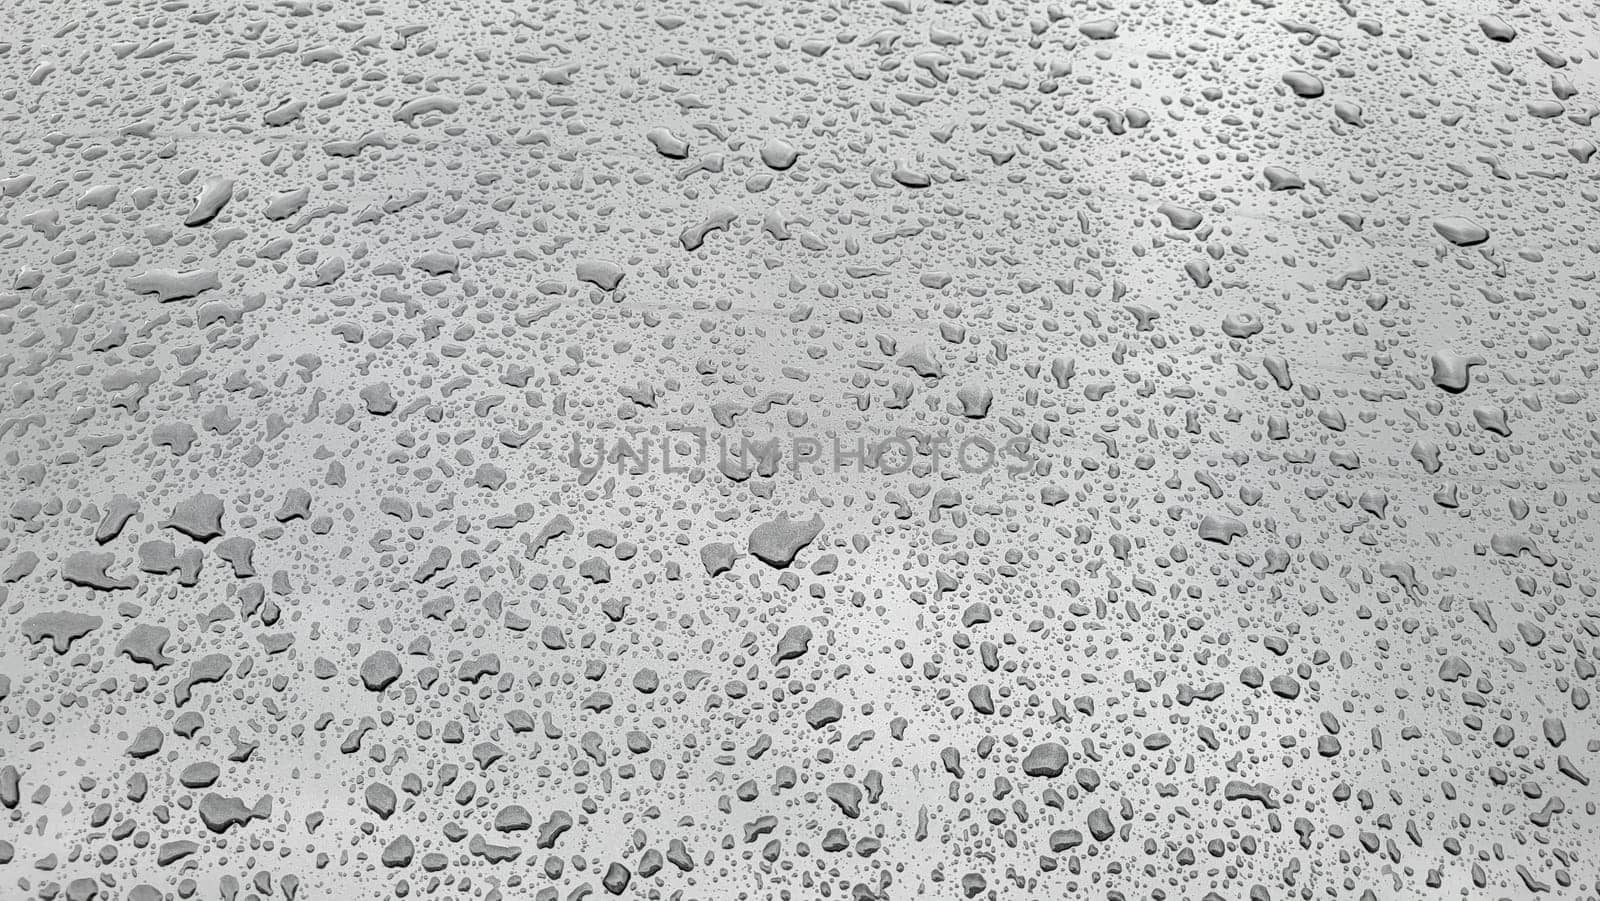 A drop of water on the hood of the car. Water drops after rain or car wash by lapushka62